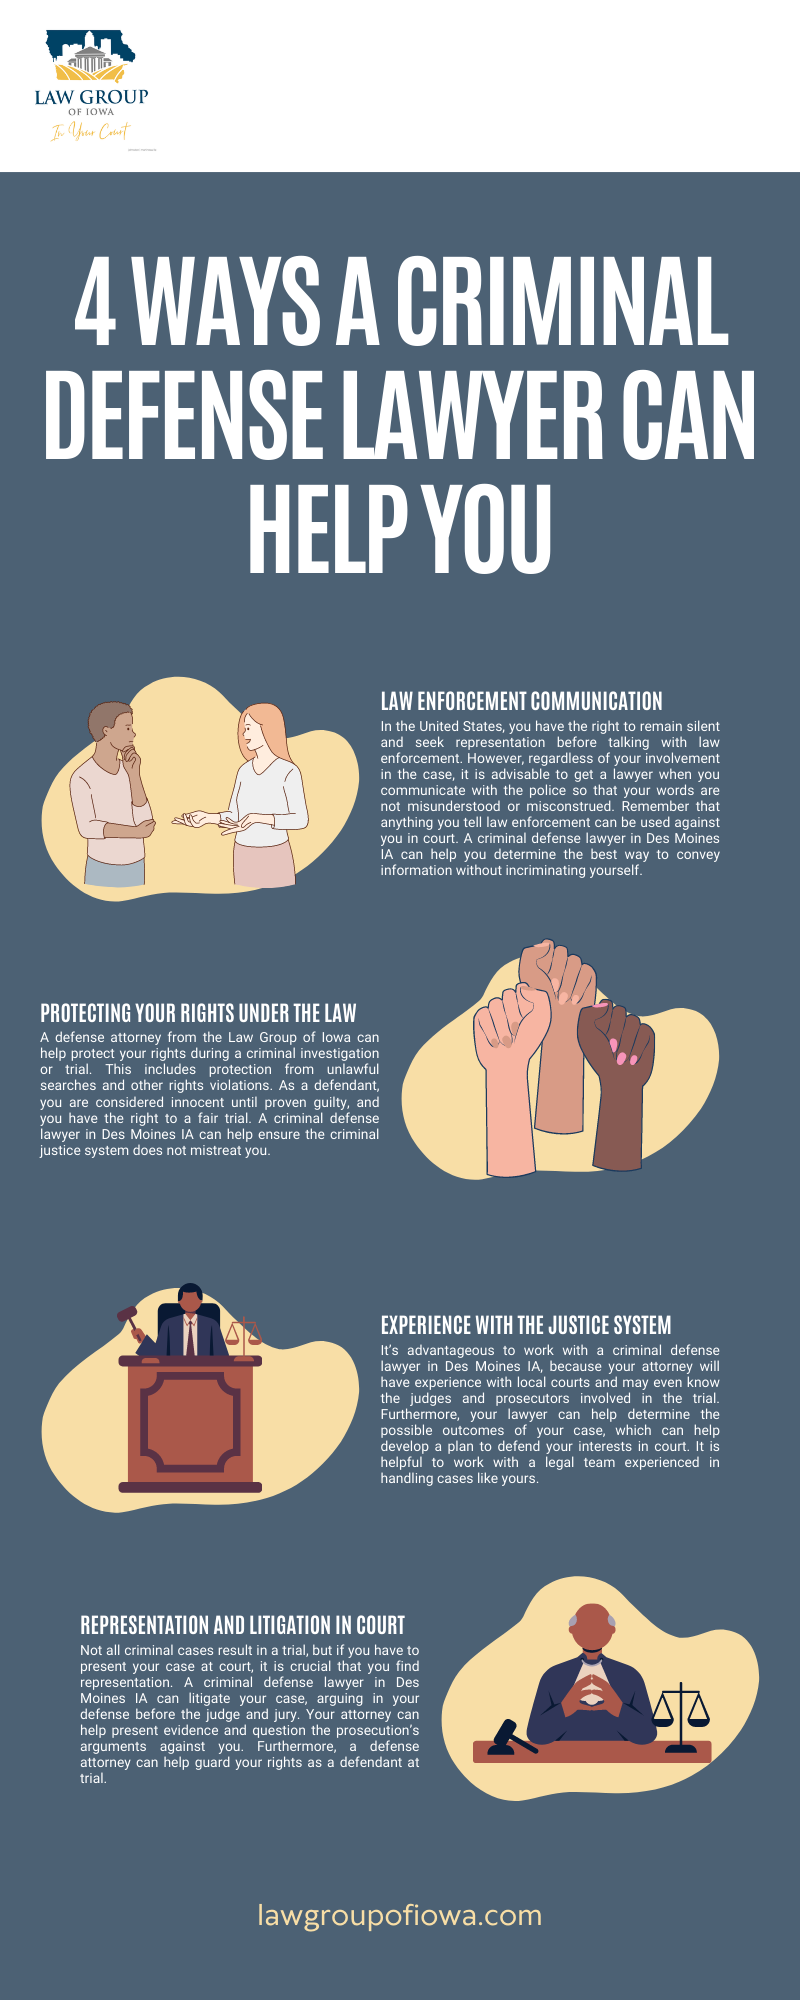 4 Ways A Criminal Defense Lawyer Can Help You Infographic